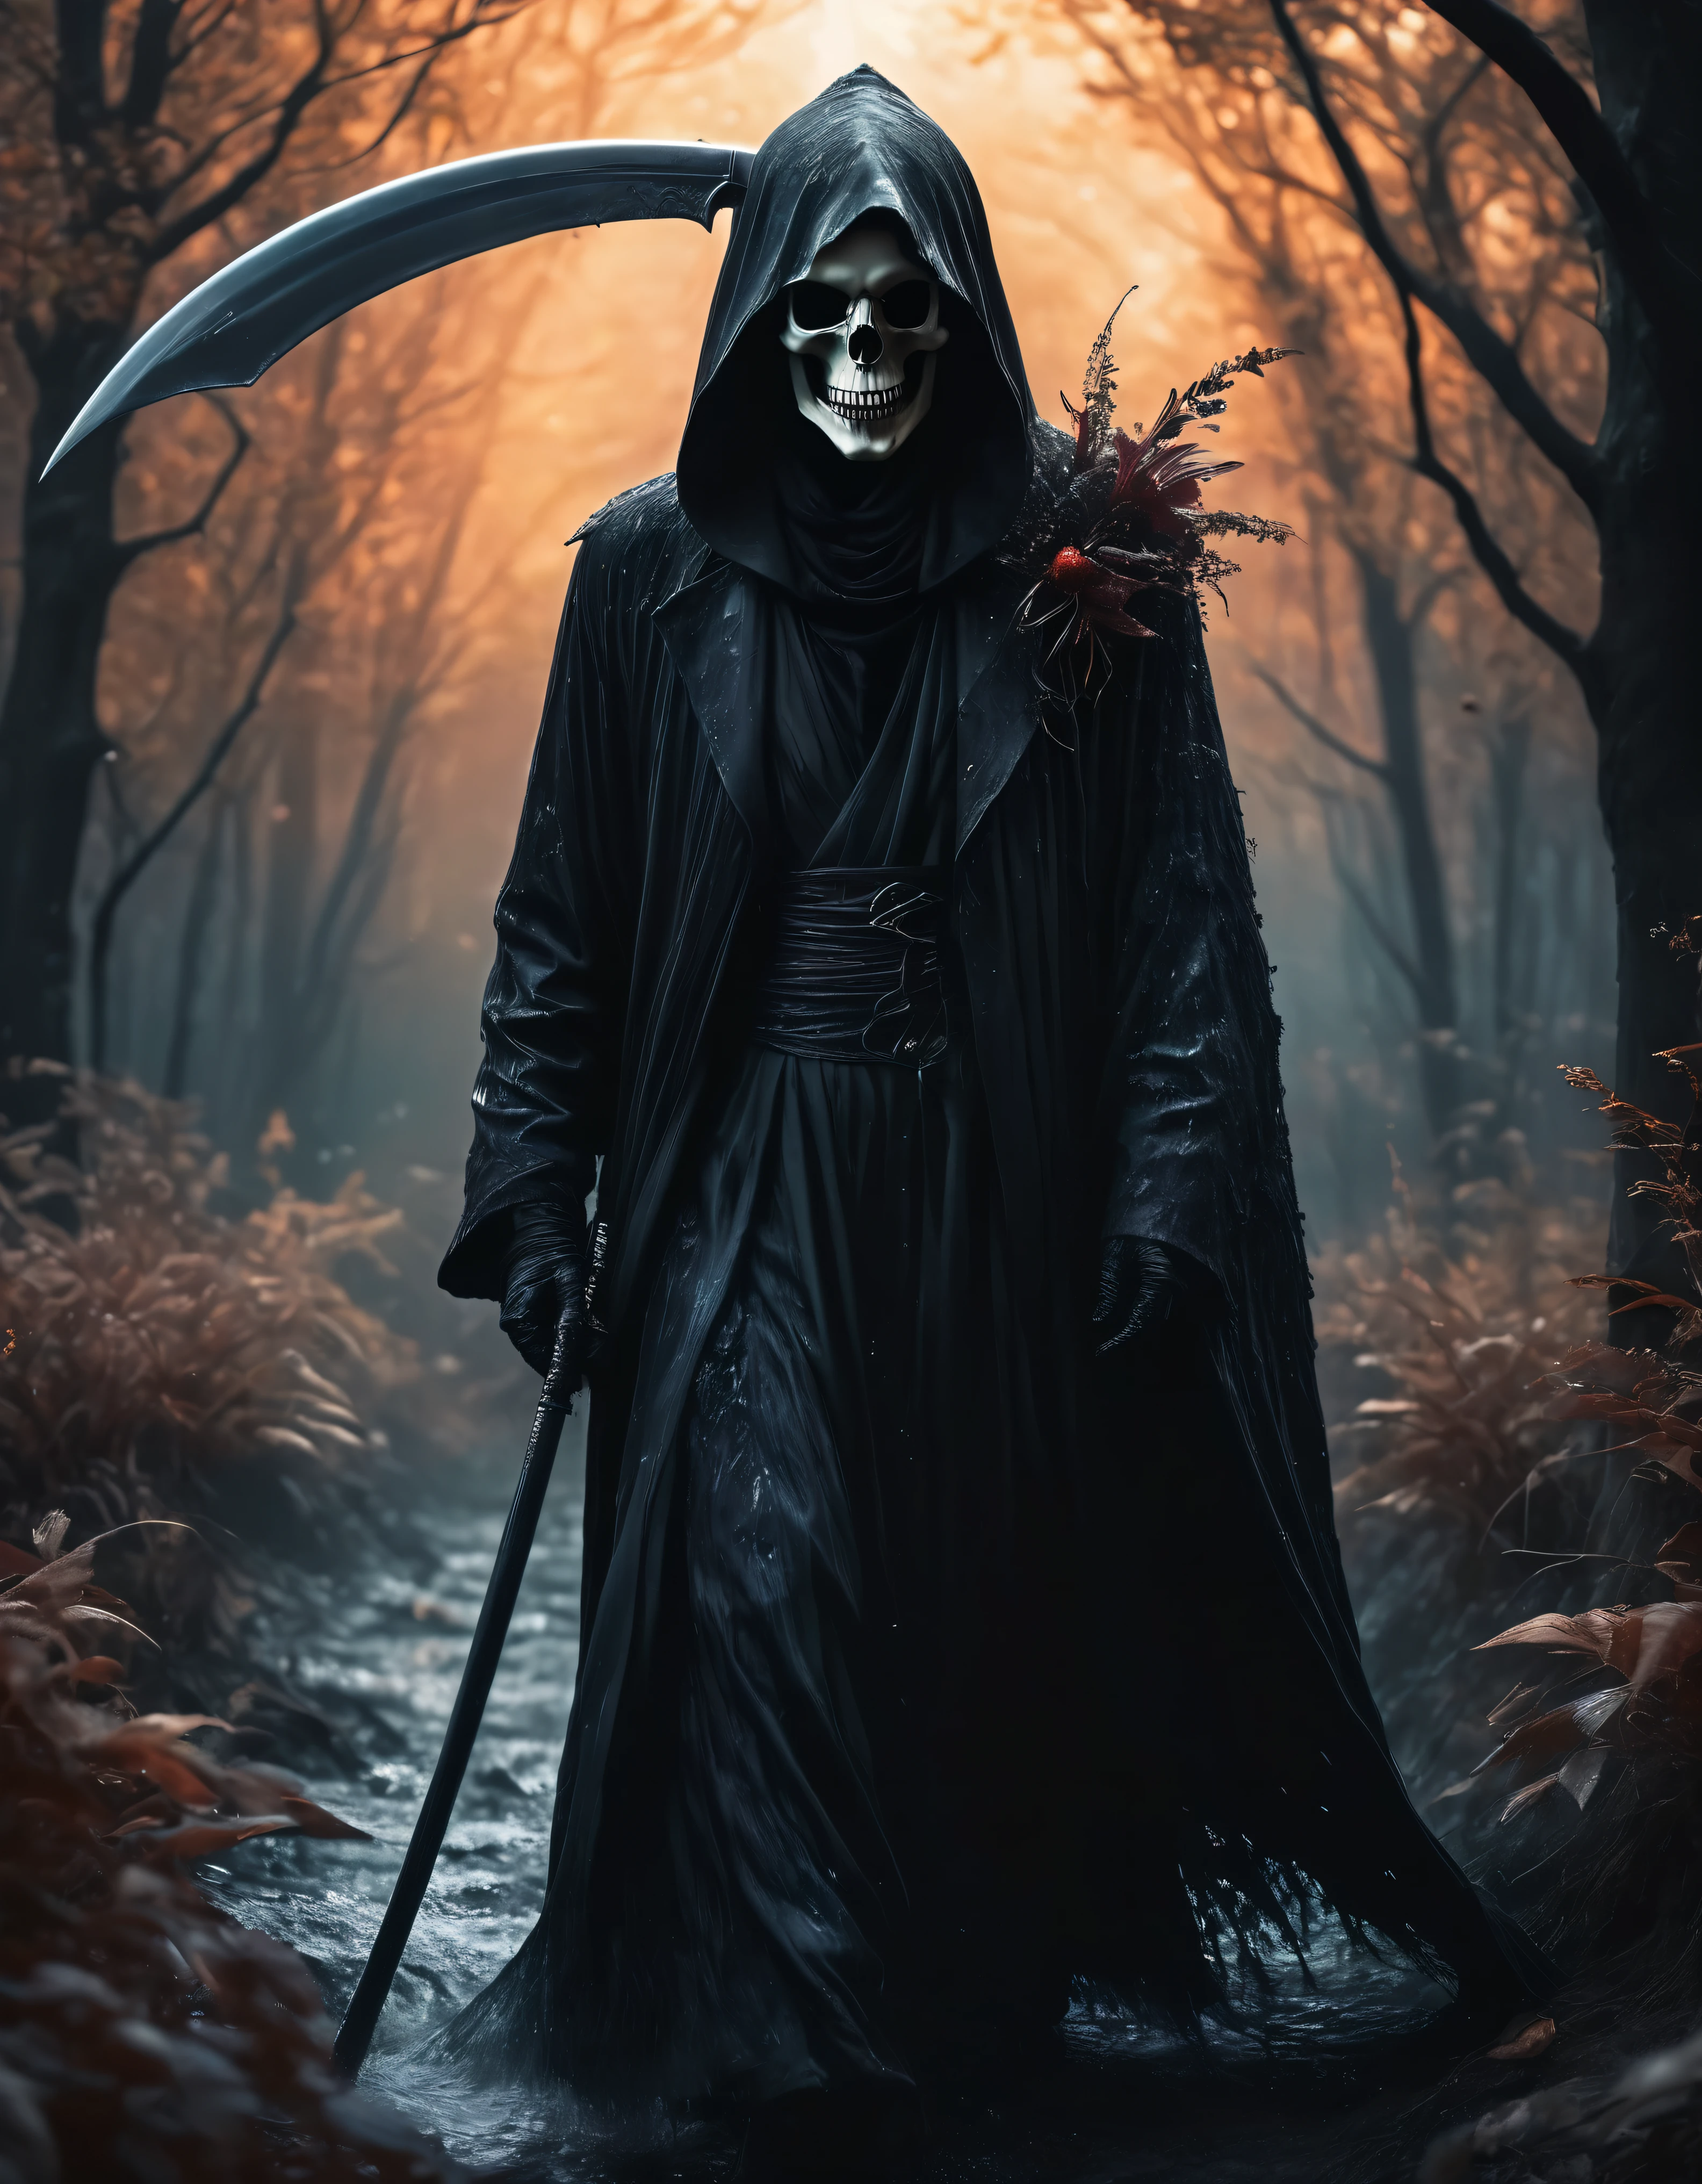 ((Masterpiece in maximum 16K resolution):1.6),((soft_color_photograpy:)1.5), ((Ultra-Detailed):1.4),((Movie-like still images and dynamic angles):1.3) | ((double contact):1.3), ((Scary Black Grim Reaper silhoutte effect):1.2), ((Superimposed on Pretty Female):1.1)《dark forest sky》Agnes Cecile, Jeremy Mann, Oil and ink on canvas, fine dark art, super dramatic light, photoillustration, amazing depth, the ultra-detailed, iridescent black, superfluous dreams, intricately details, amazing depth, Amazing atmosphere, Mesmerizing whimsical vibrant landscapes, ((Grim reaper scythe):1.2), Maximalism ((beautiful outside, Ugly inside, pressure and pain, beauty and despair, hard and soft, positive and negative, hot and cold, Sweet and sour, Vibrant but boring, Perfect harmony, light and shadows, old and young, Black and white, Corresponding color, loud and quiet, Chaos and peace, life and death):1.2) The complex masterpiece of a real-time engineering leader. | Rendered in ultra-high definition with UHD and retina quality, this masterpiece ensures anatomical correctness and textured skin with super detail. With a focus on high quality and accuracy, this award-winning portrayal captures every nuance in stunning 16k resolution, immersing viewers in its lifelike depiction. | ((perfect_composition, perfect_design, perfect_layout, perfect_detail, ultra_detailed)), ((enhance_all, fix_everything)), More Detail, Enhance.